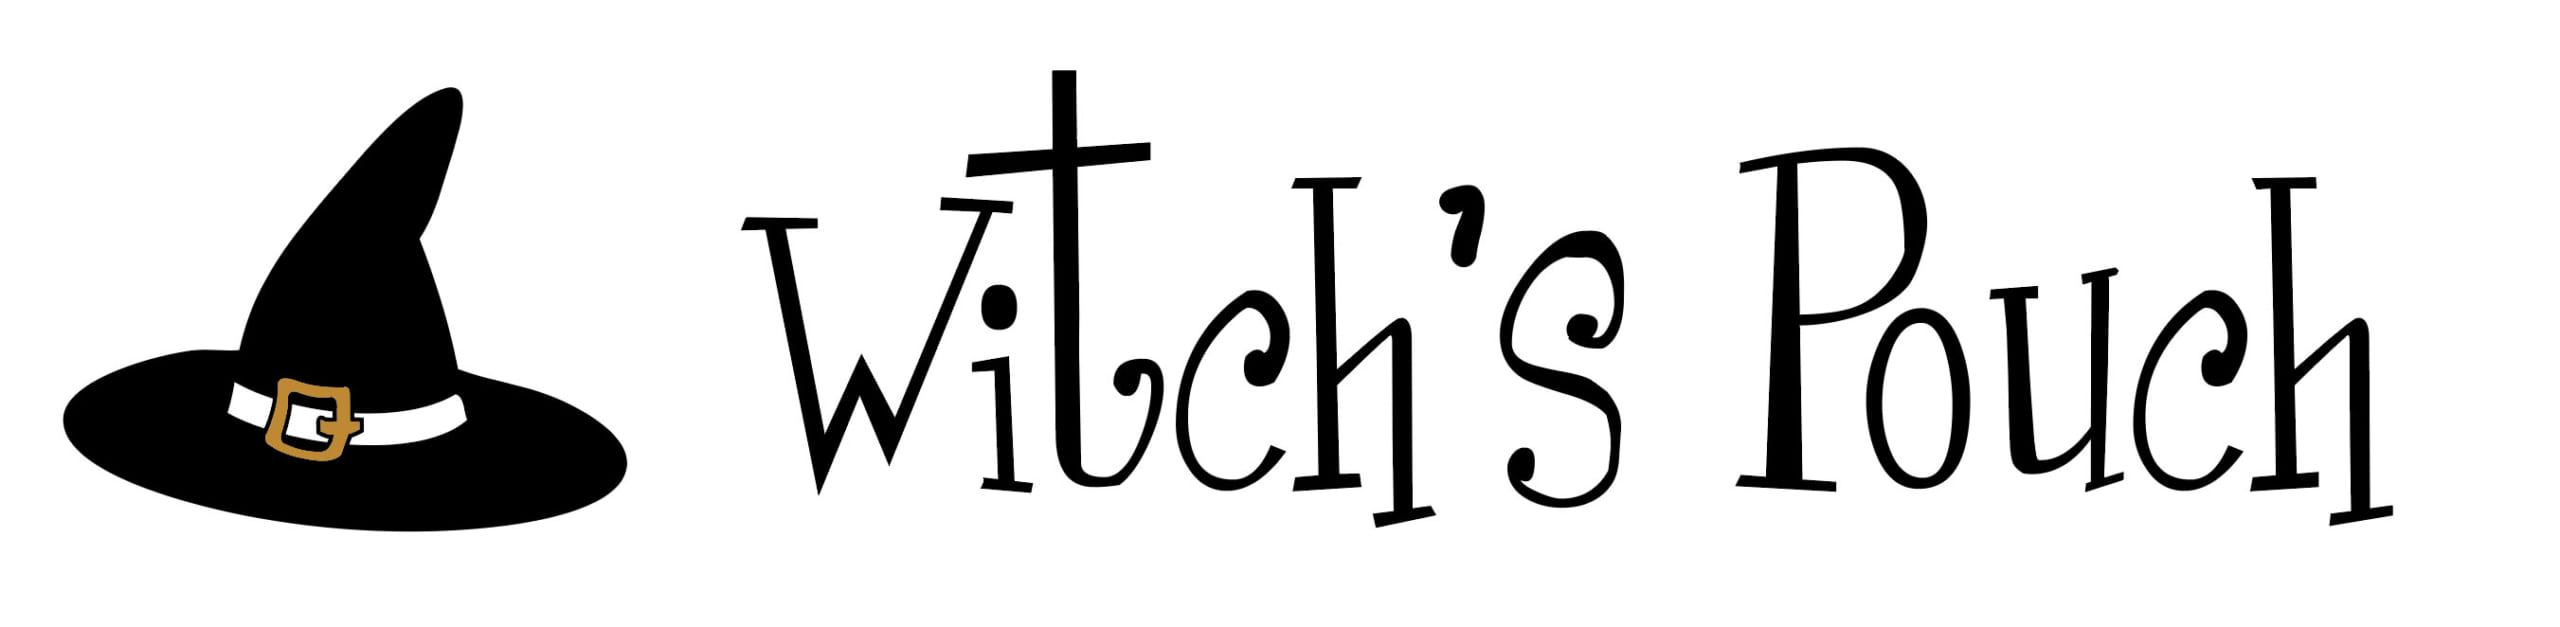 「Witch’s Pouch」ロゴ